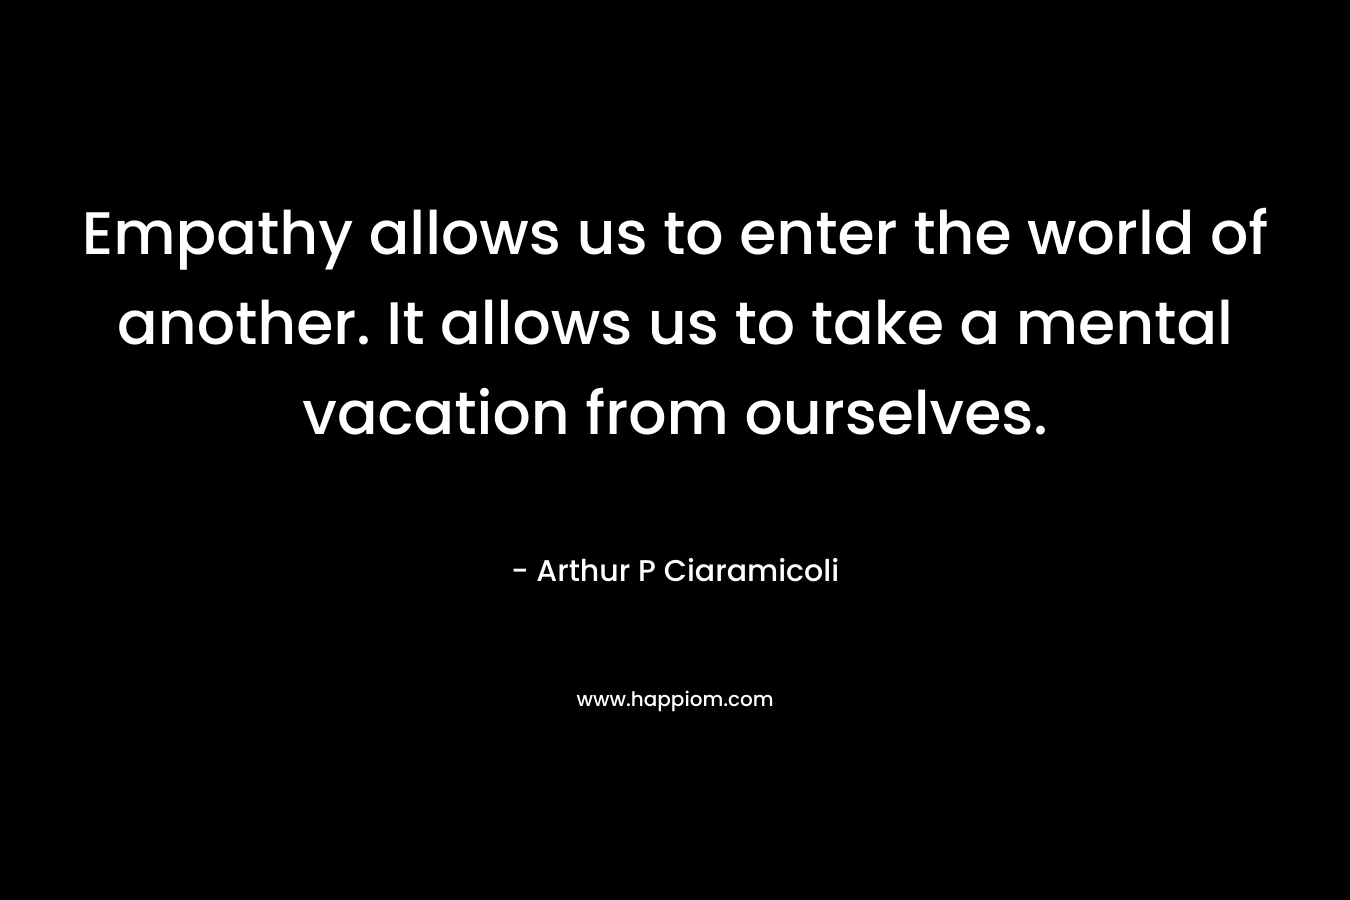 Empathy allows us to enter the world of another. It allows us to take a mental vacation from ourselves. – Arthur P Ciaramicoli